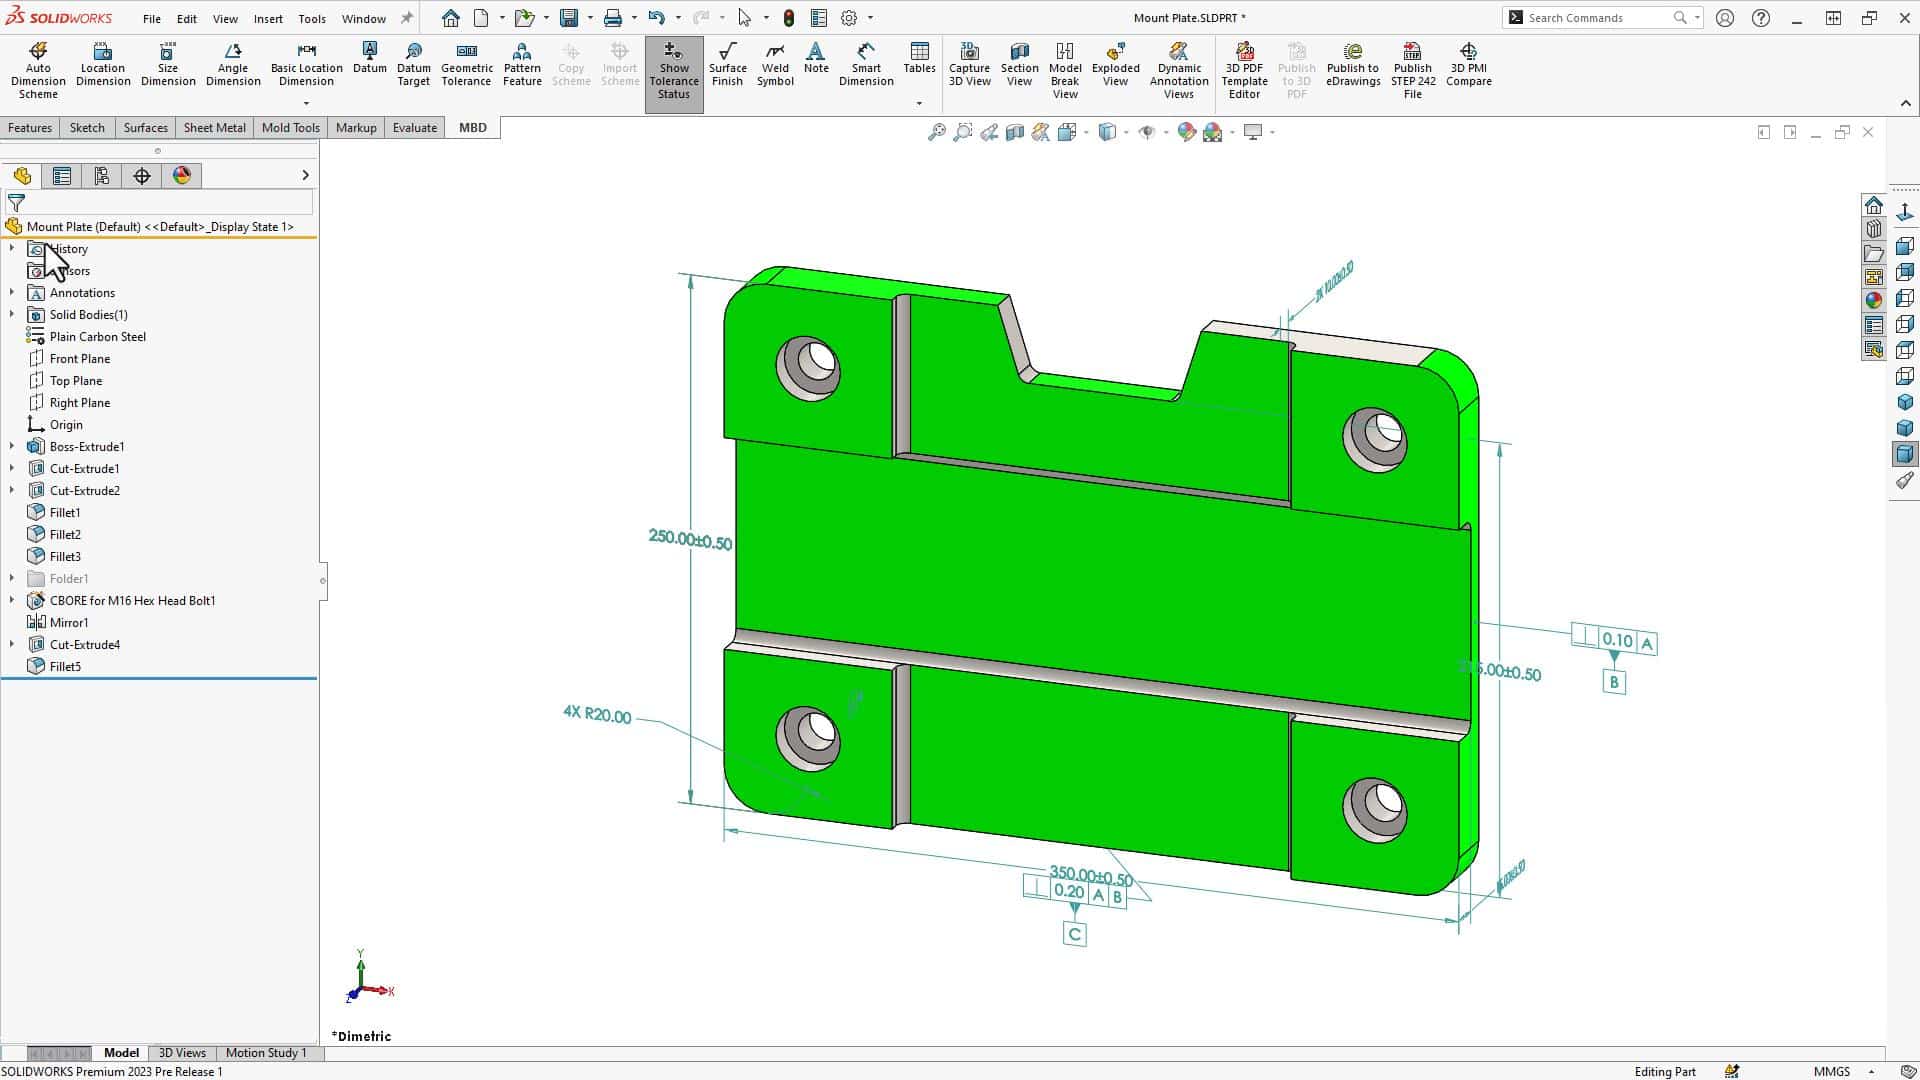 Green faces indicate proper tolerancing in SOLIDWORKS MBD. This image shows a model with adequate tolerancing on all faces.